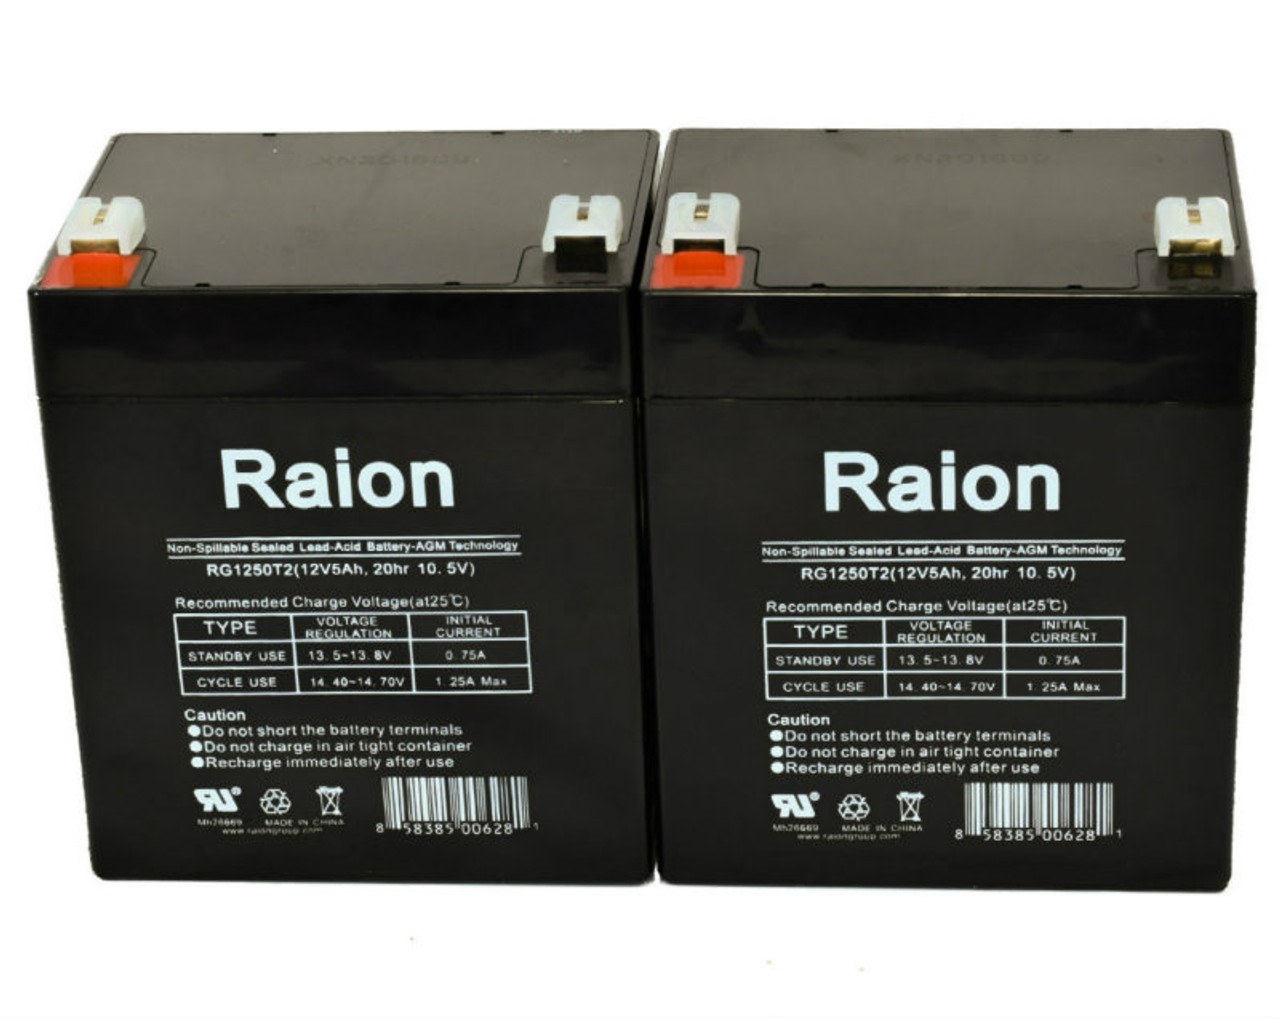 Raion Power 12V 5Ah RG1250T2 Replacement Lead Acid Battery for Narada 6-FM-4.5 - 2 Pack